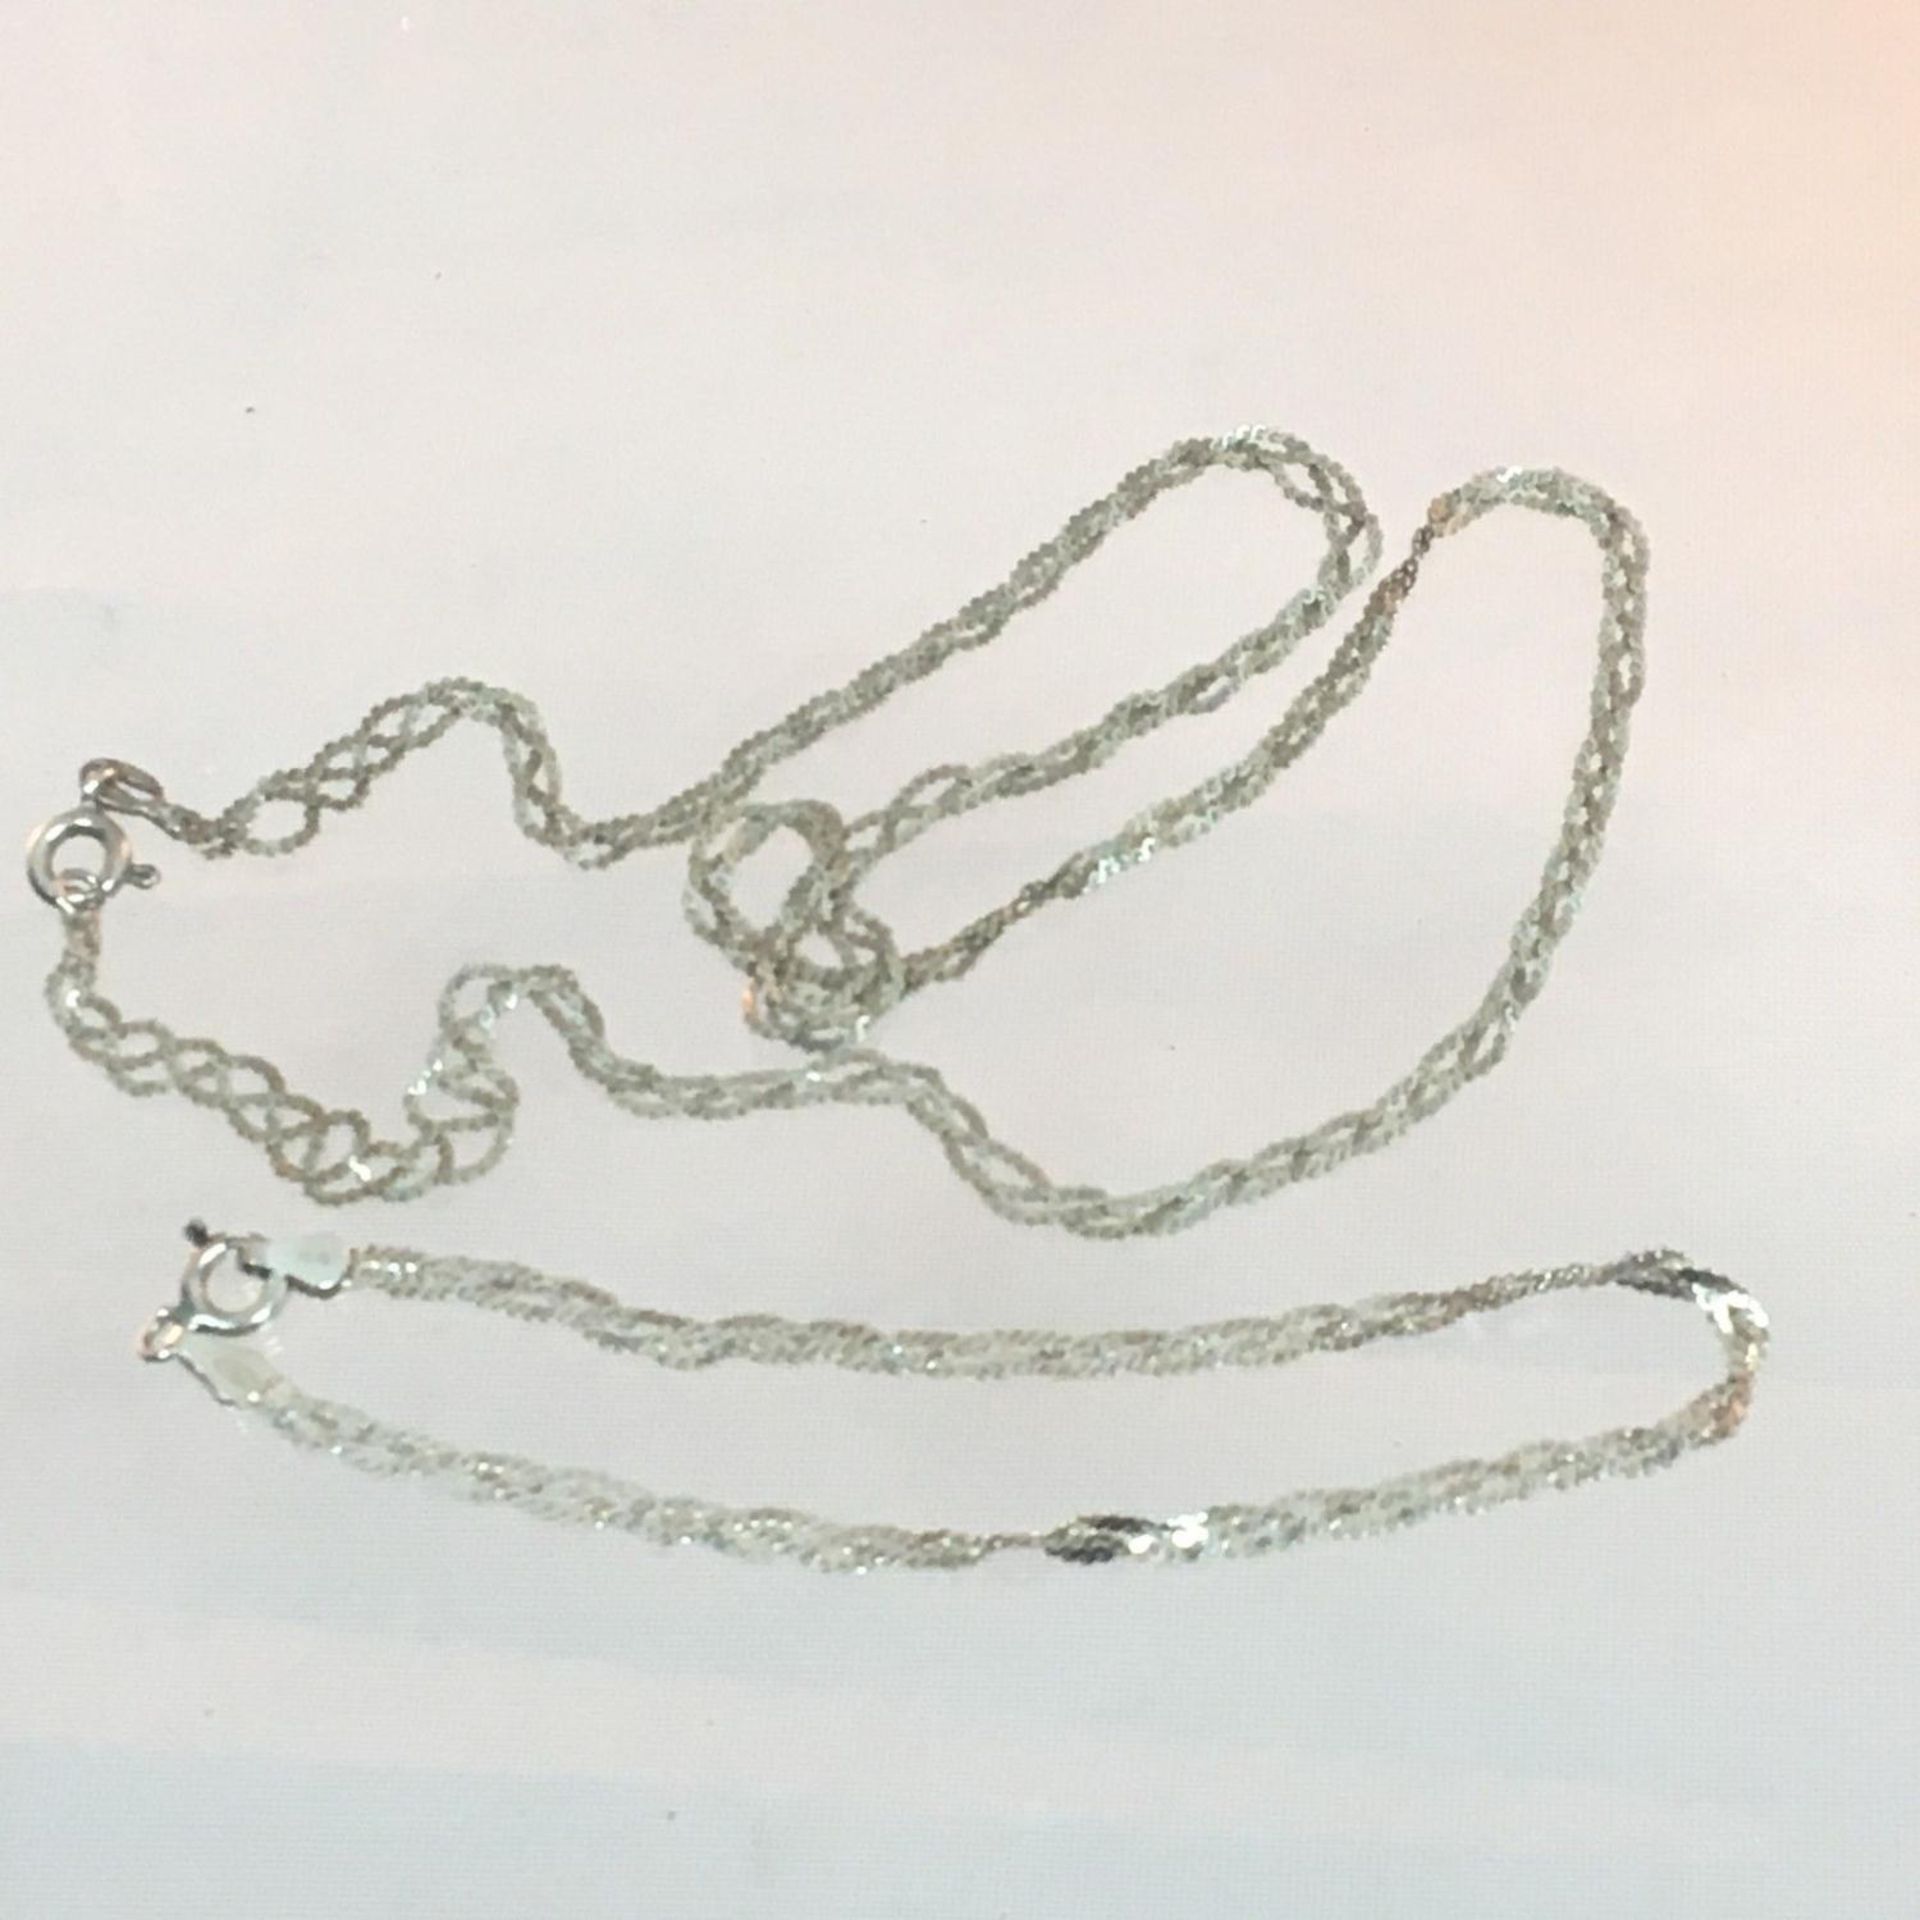 925 silver necklace and bracelet set, Both pieces marked Italy 925, each consisting of 3 chains